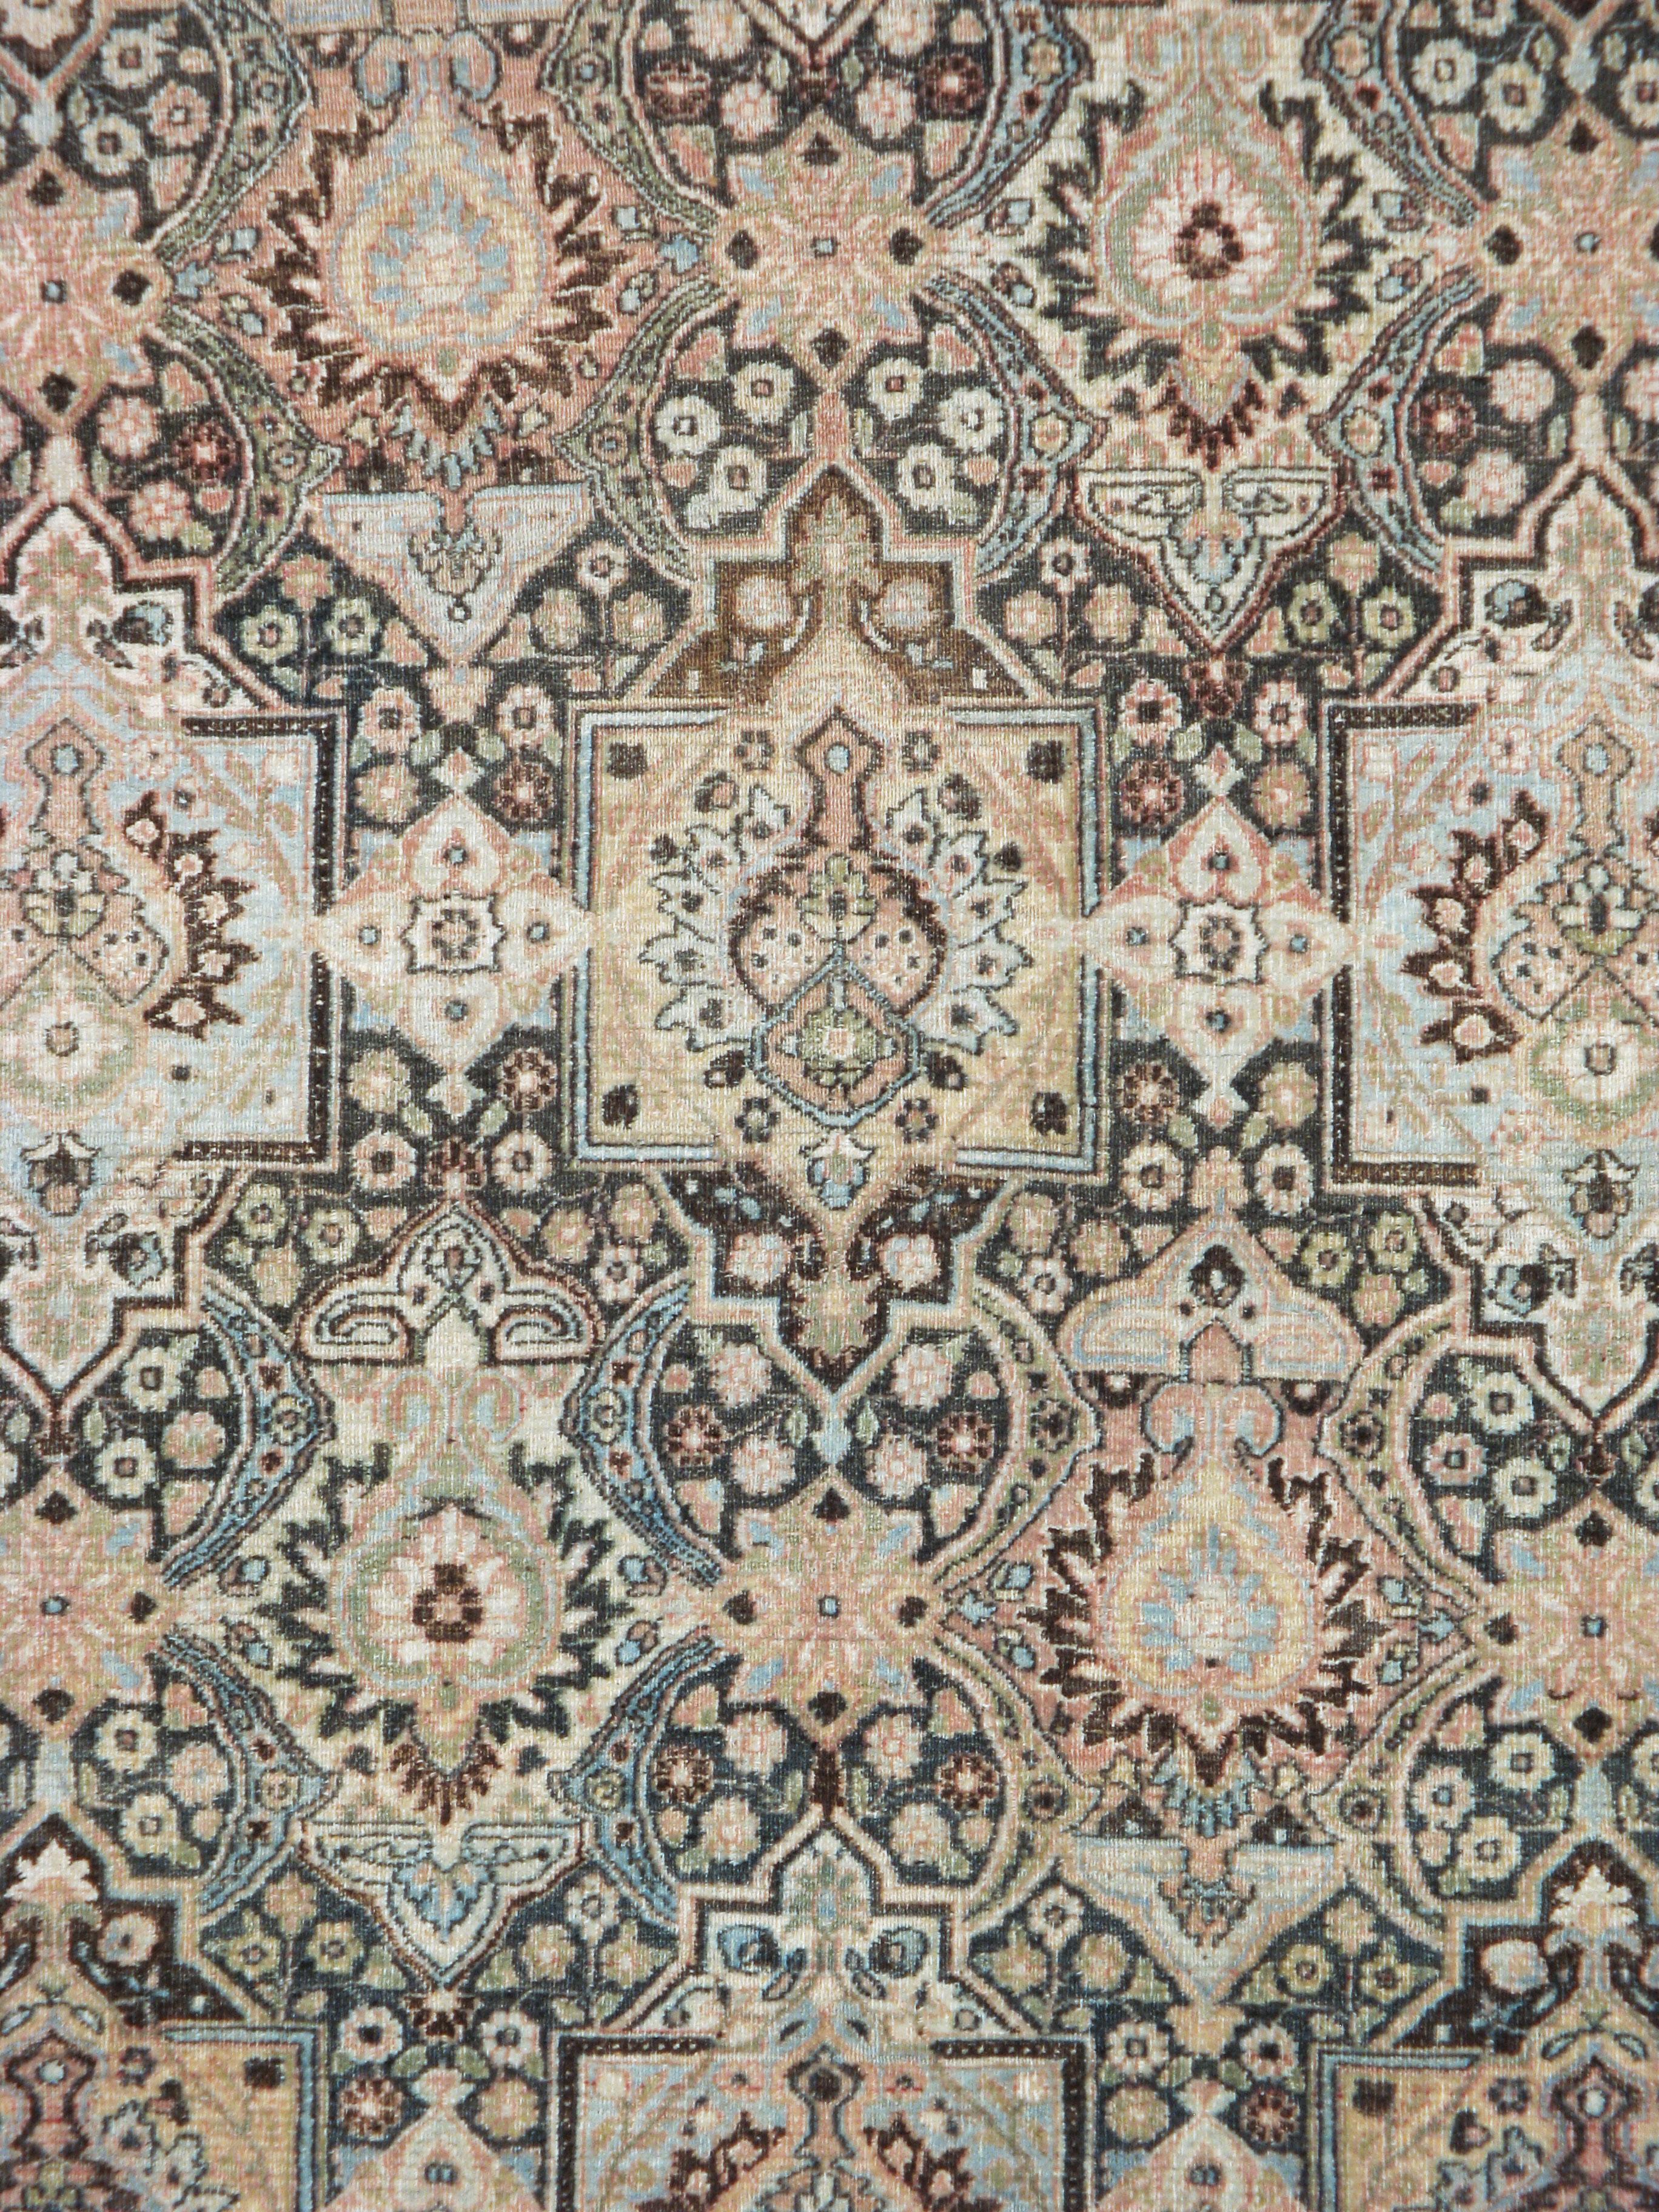 An antique Persian Dorokhsh carpet from the early 20th century. The dark brown field features squared cartouches enclosing palmettes alternating with palmettes-in-lozenges in offset rows. The ivory main border displays fan palmettes and other